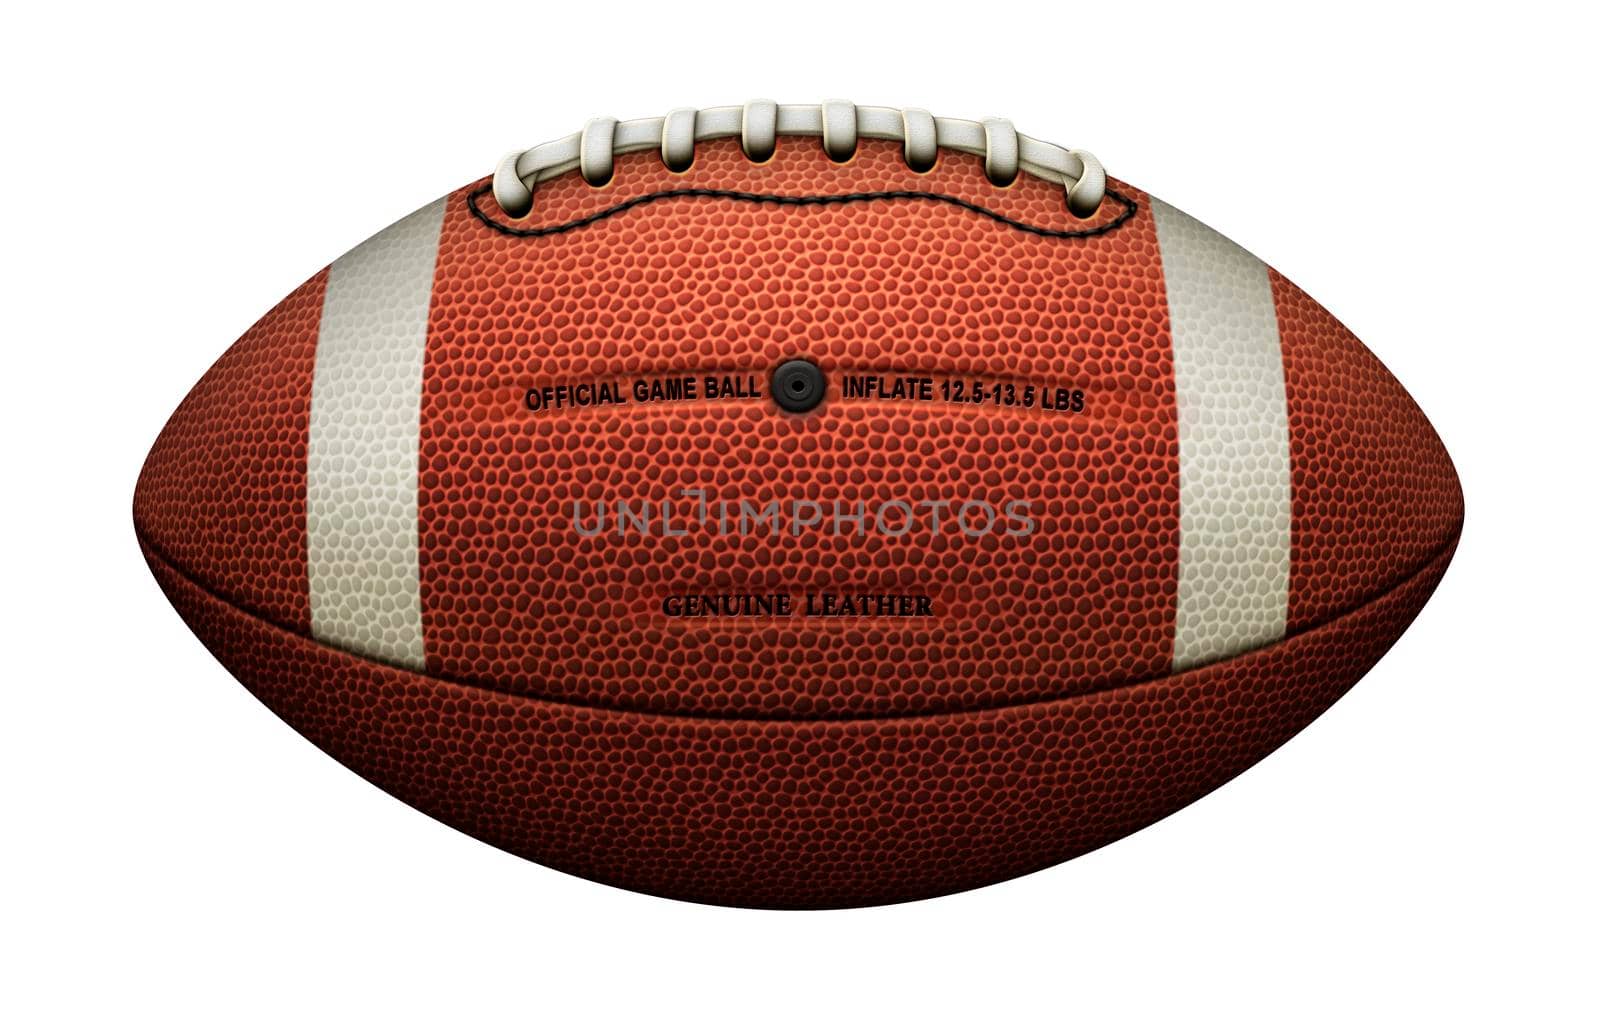 An american football with the typical white stripes, air valve, and the laces positioned at top; Isolated from the background. Includes a clipping path.